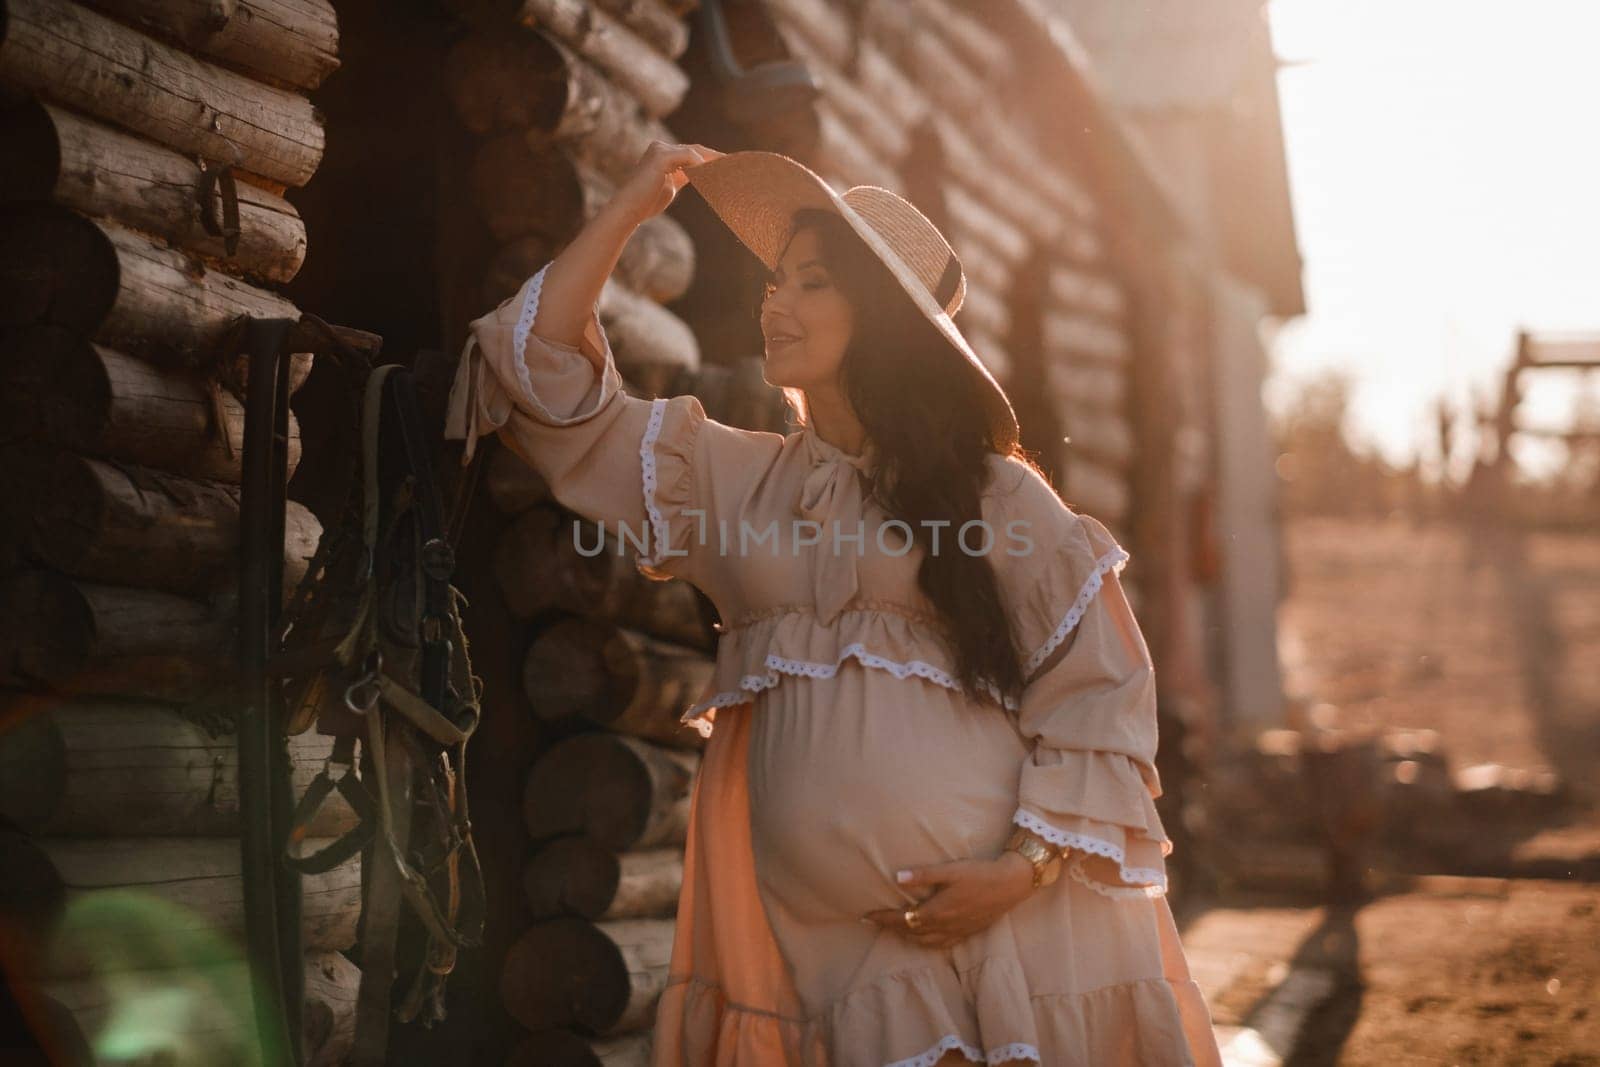 pregnant woman in a dress and hat in the countryside.